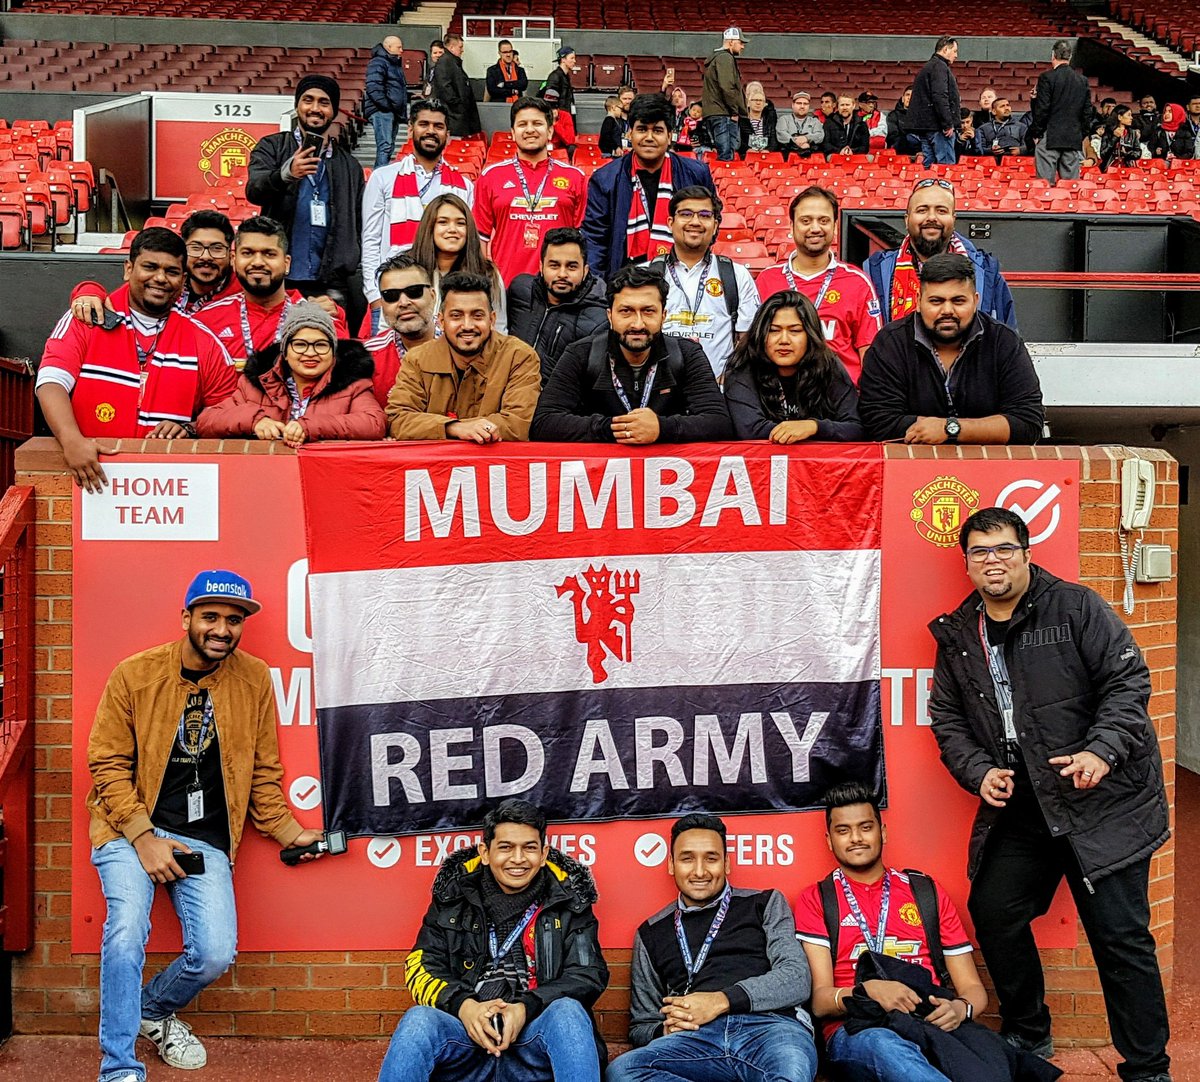 I don't want our Supporters Club to lose our Official Status cause a LOT of people have worked very hard to get here. The SC will continue to help all the fans from Mumbai make their dream come true, through our allocation of tickets.